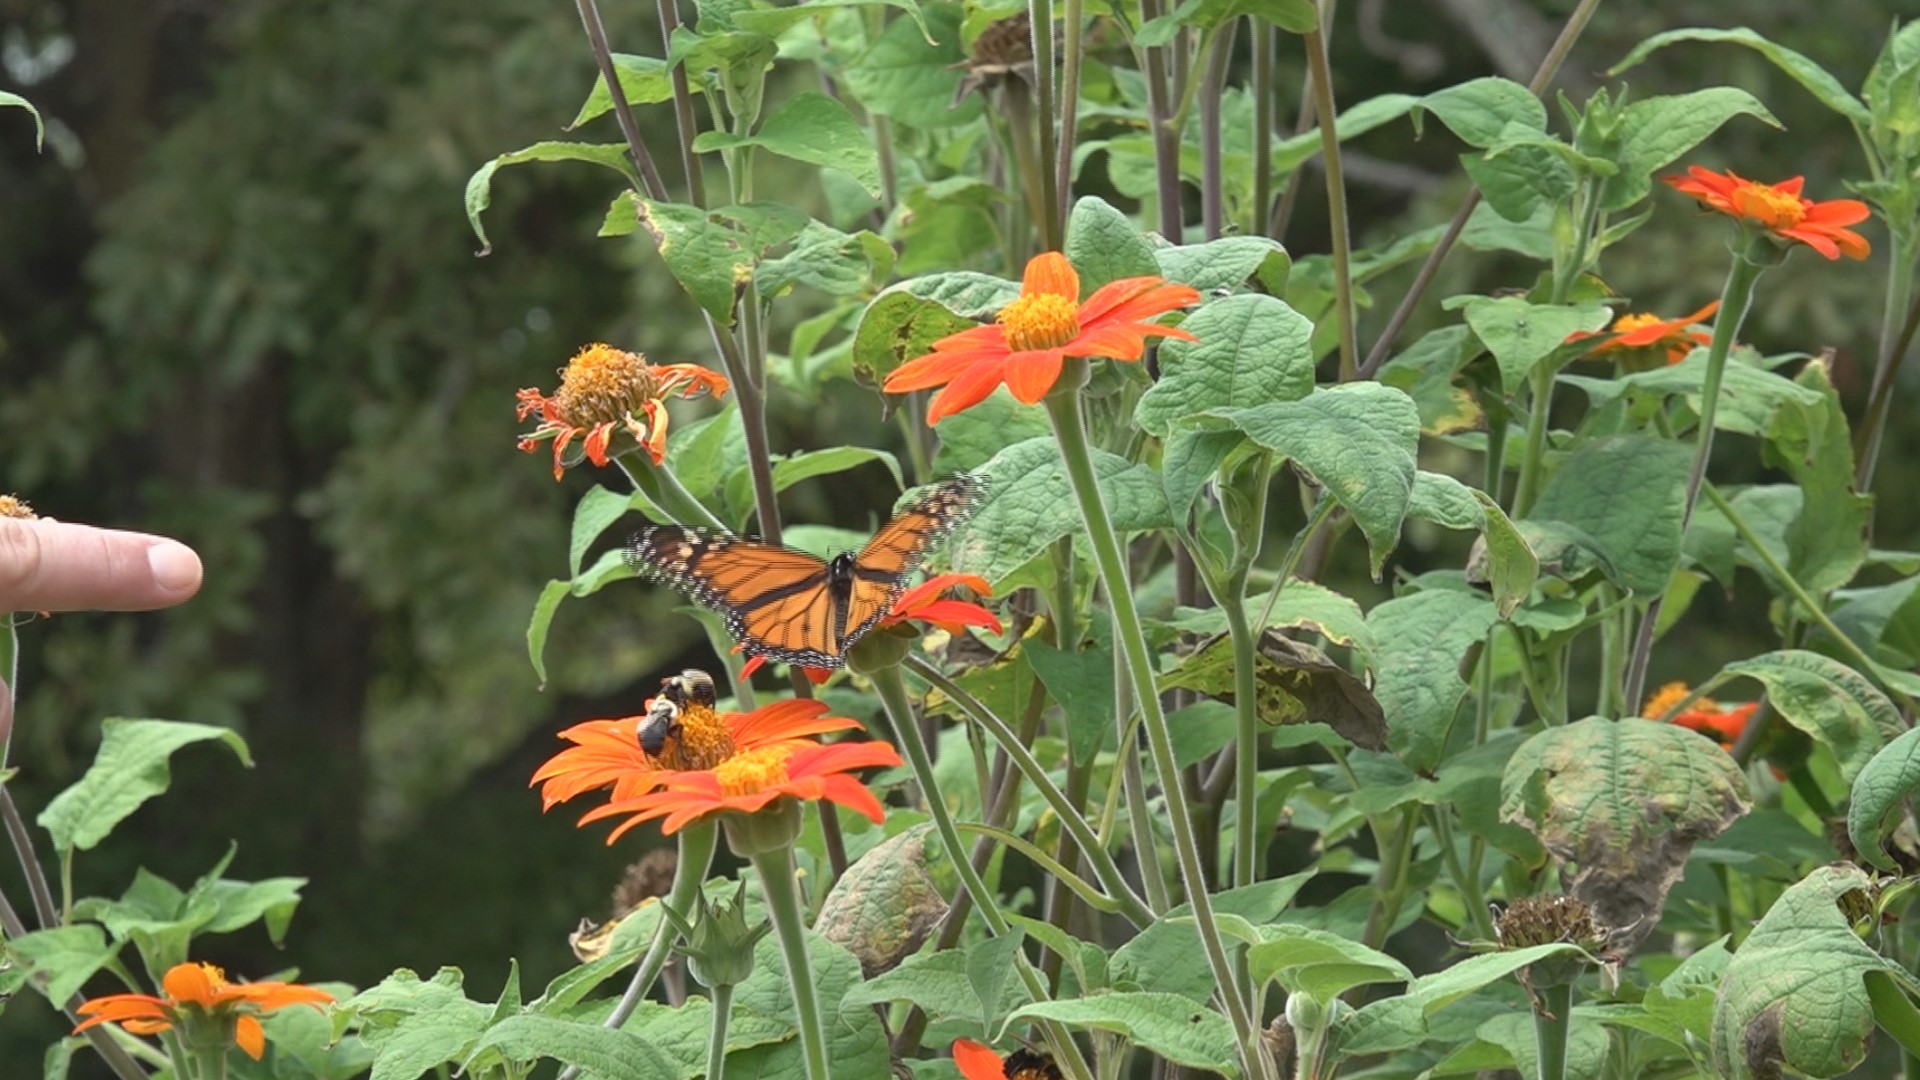 Monarch butterflies need two different types of plants that residents can plant in their yards: a place to lay eggs and a flower to get pollen.